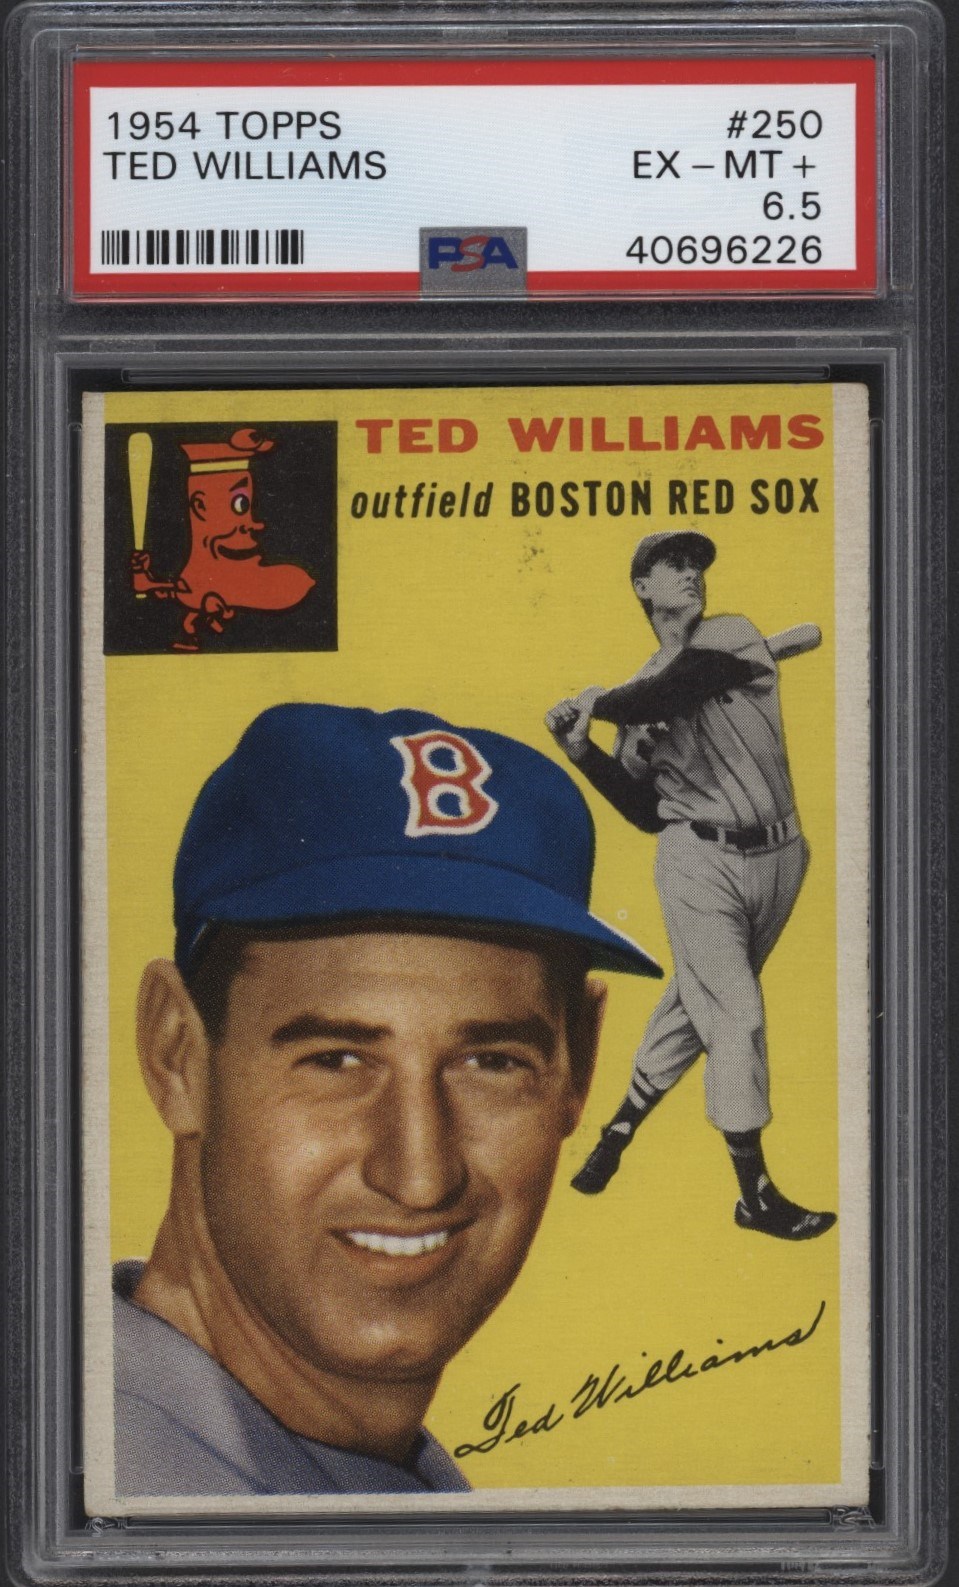 Baseball and Trading Cards - 1954 Topps #250 Ted Williams - PSA EX-MT+ 6.5